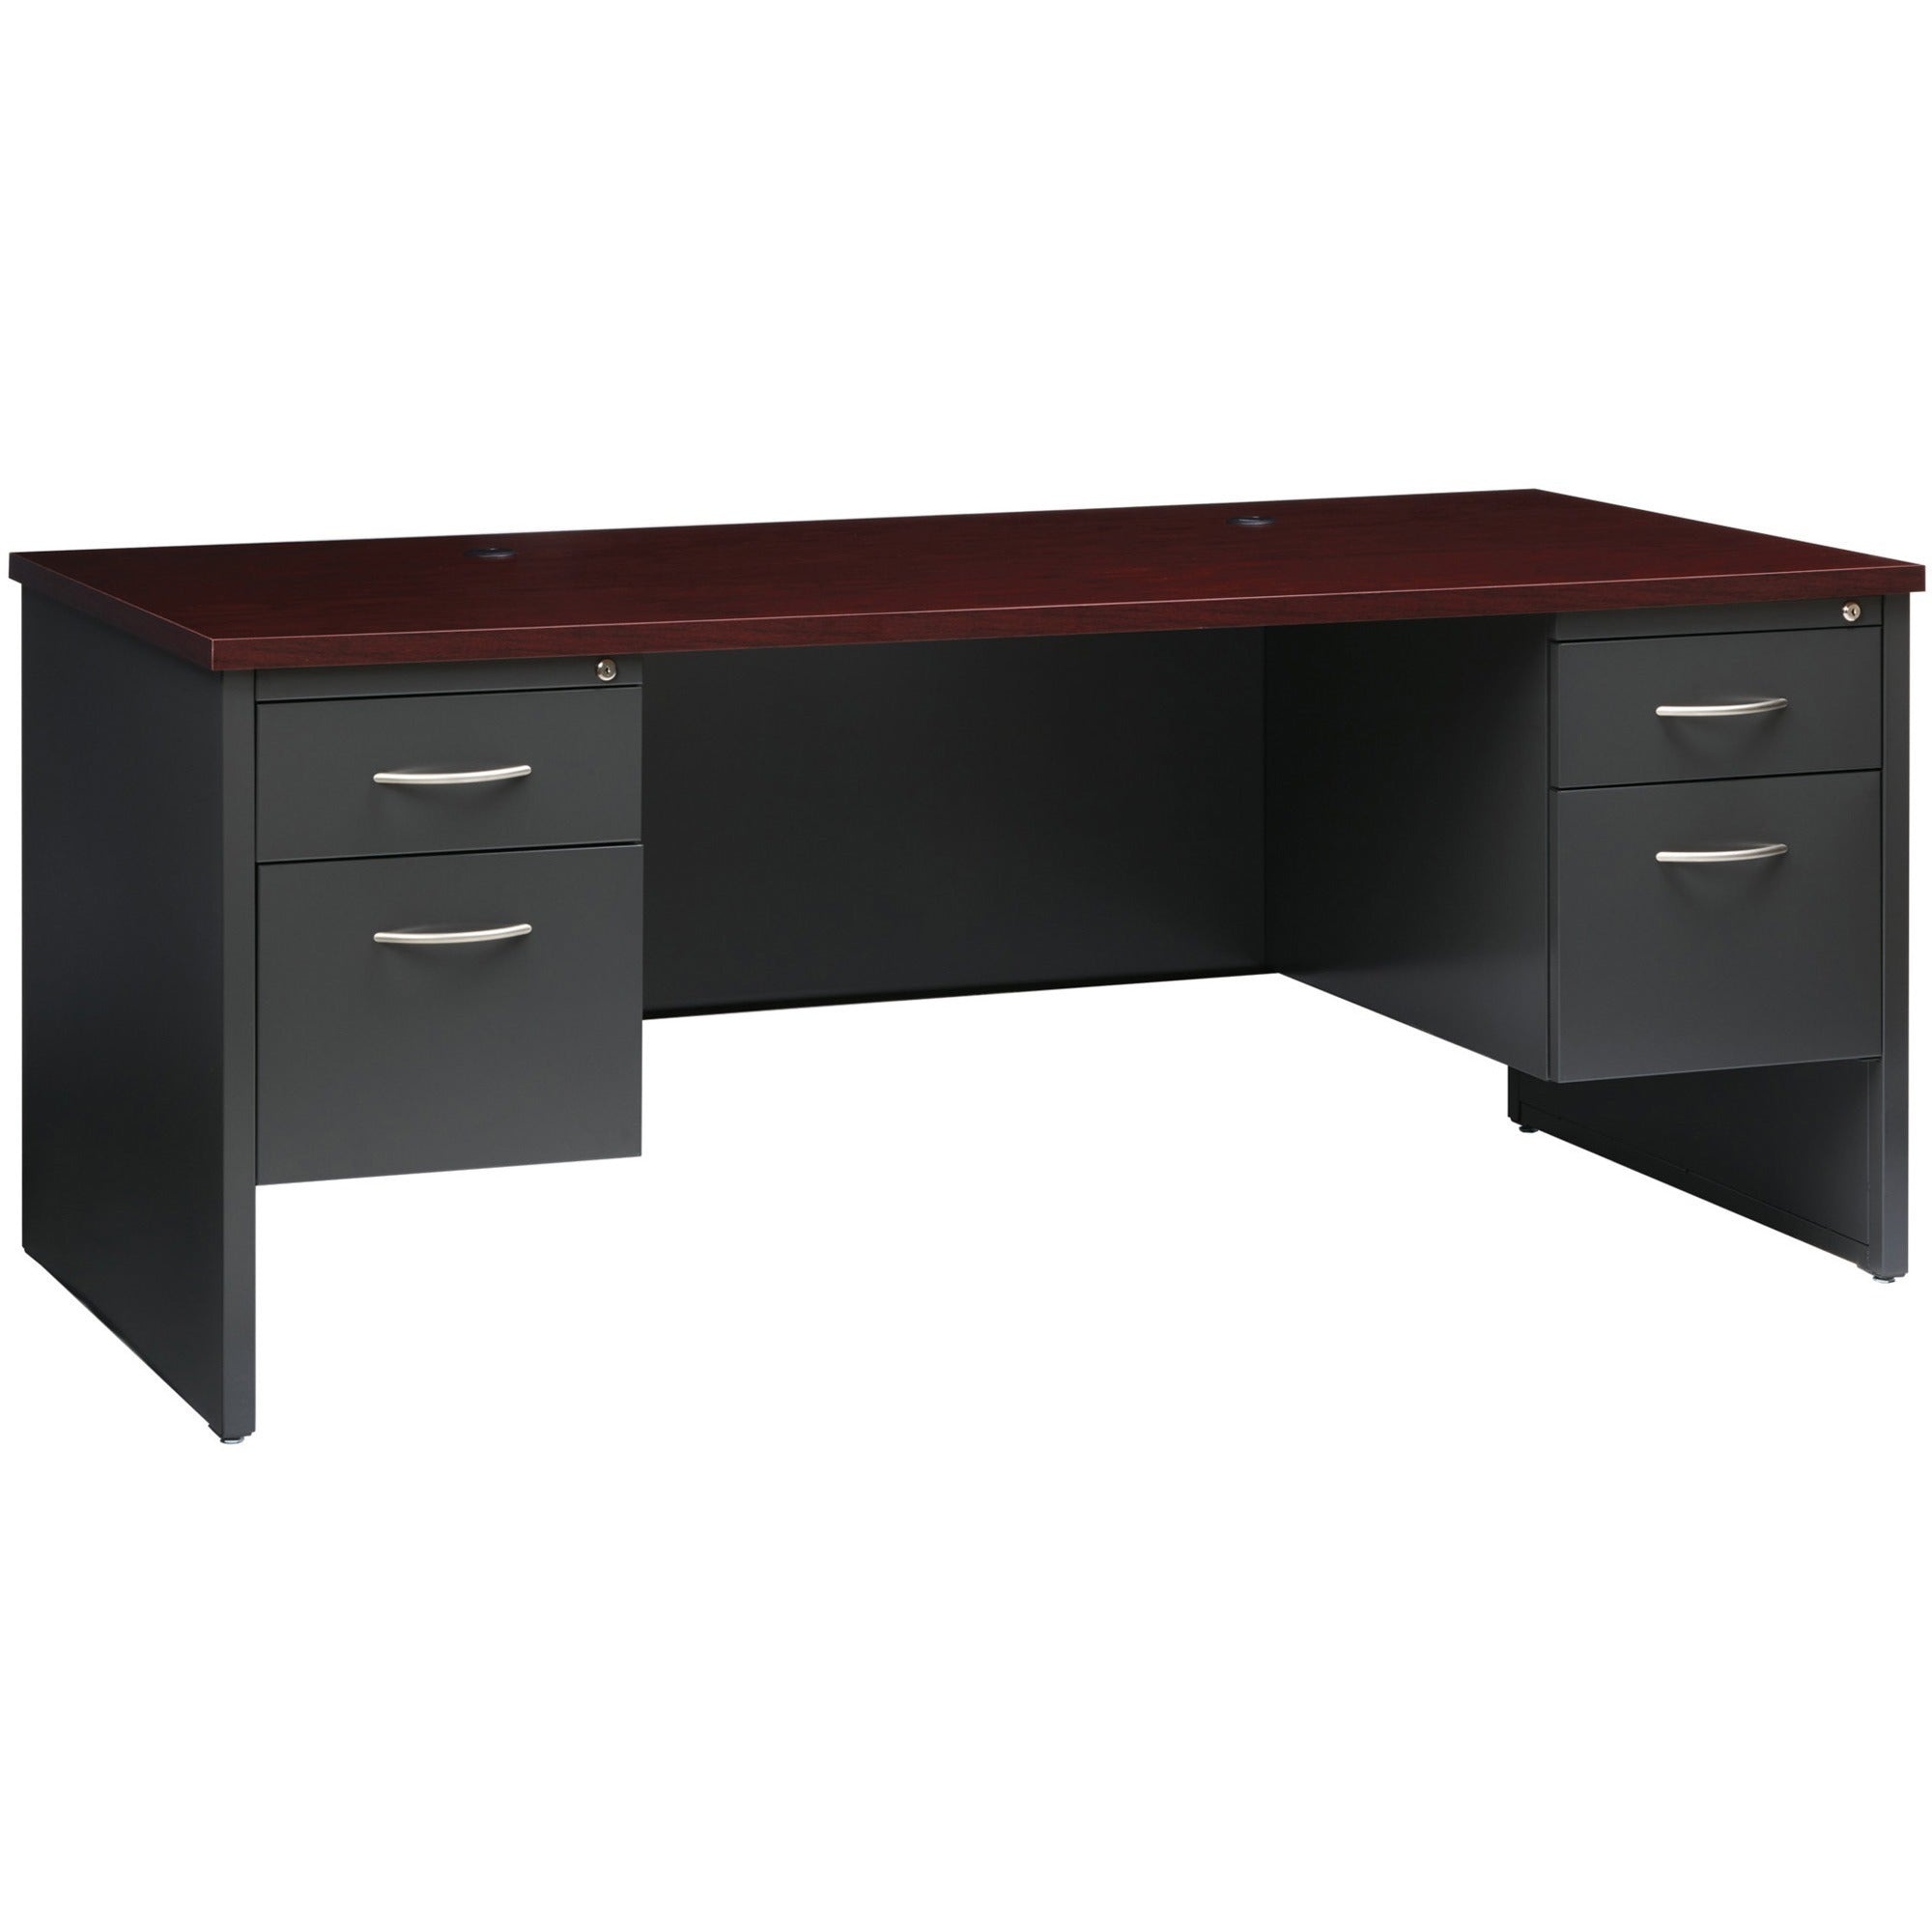 Lorell Fortress Modular Series Double-Pedestal Desk - 72" x 36" , 1.1" Top - 2 x Box, File Drawer(s) - Double Pedestal - Material: Steel - Finish: Mahogany Laminate, Charcoal - Scratch Resistant, Stain Resistant, Ball-bearing Suspension, Grommet, Han - 